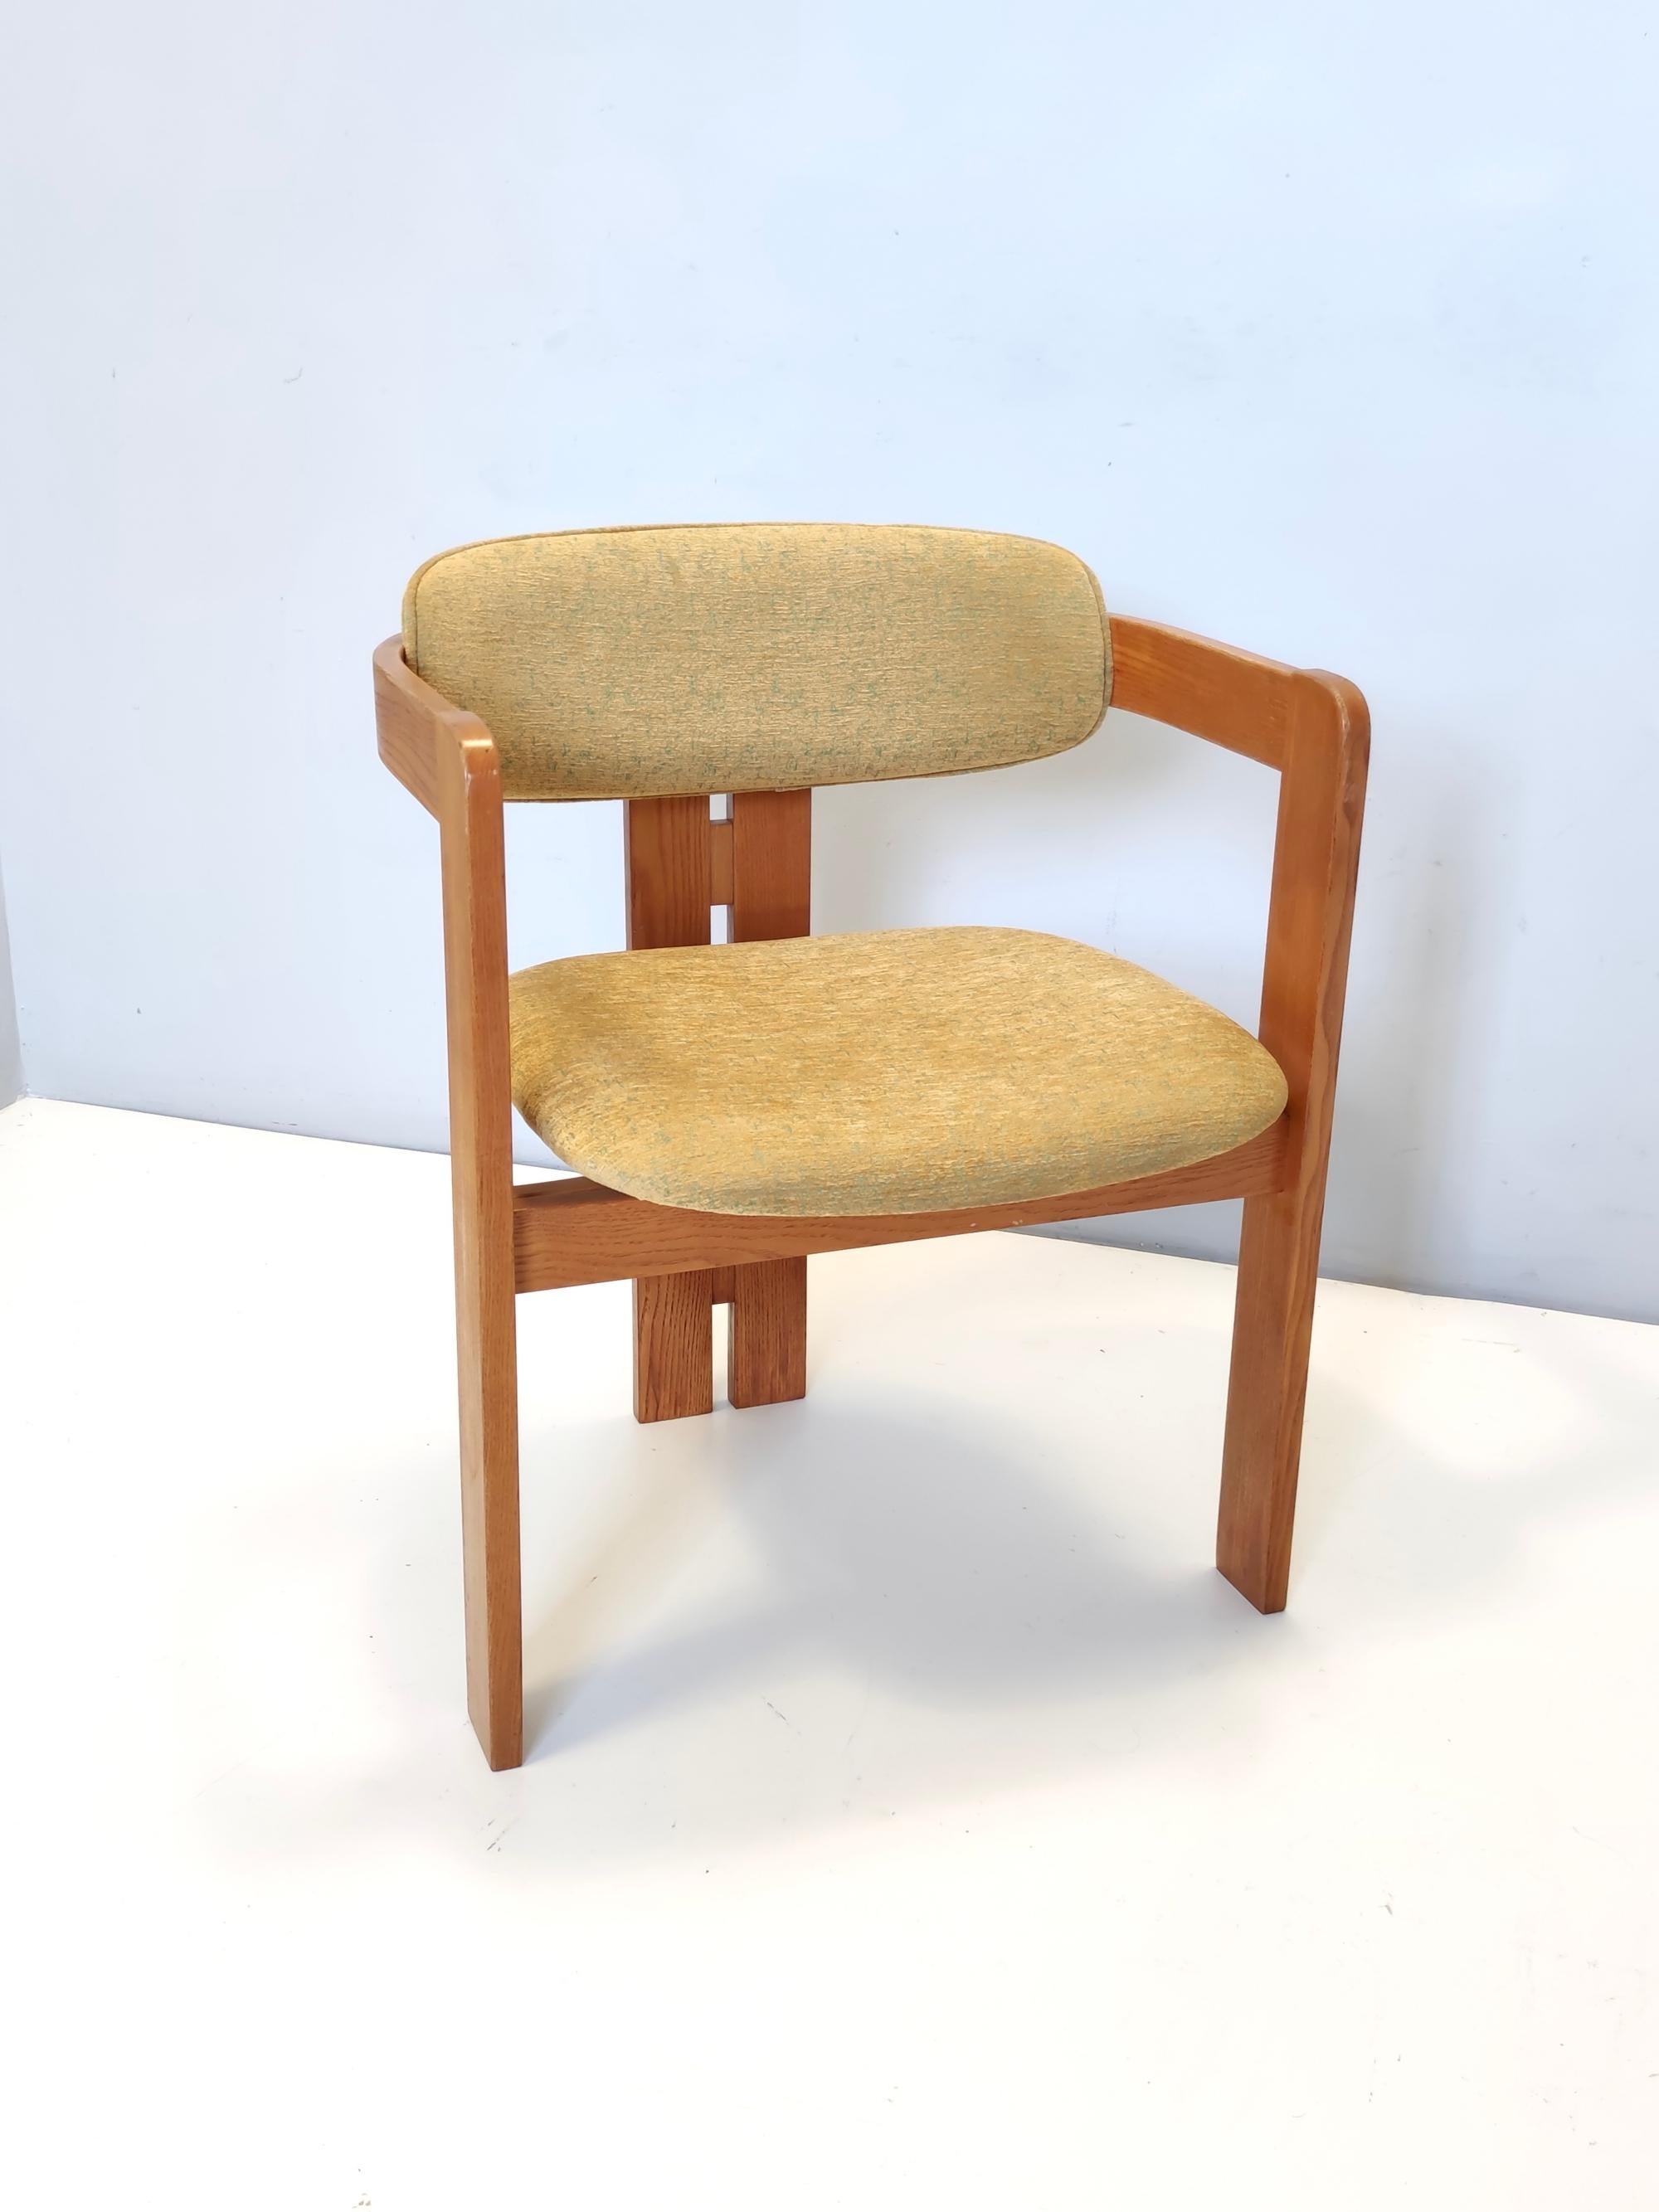 Mid-Century Modern Pigreco Chair in the style of Tobia Scarpa for Gavina with Yellow Upholstery